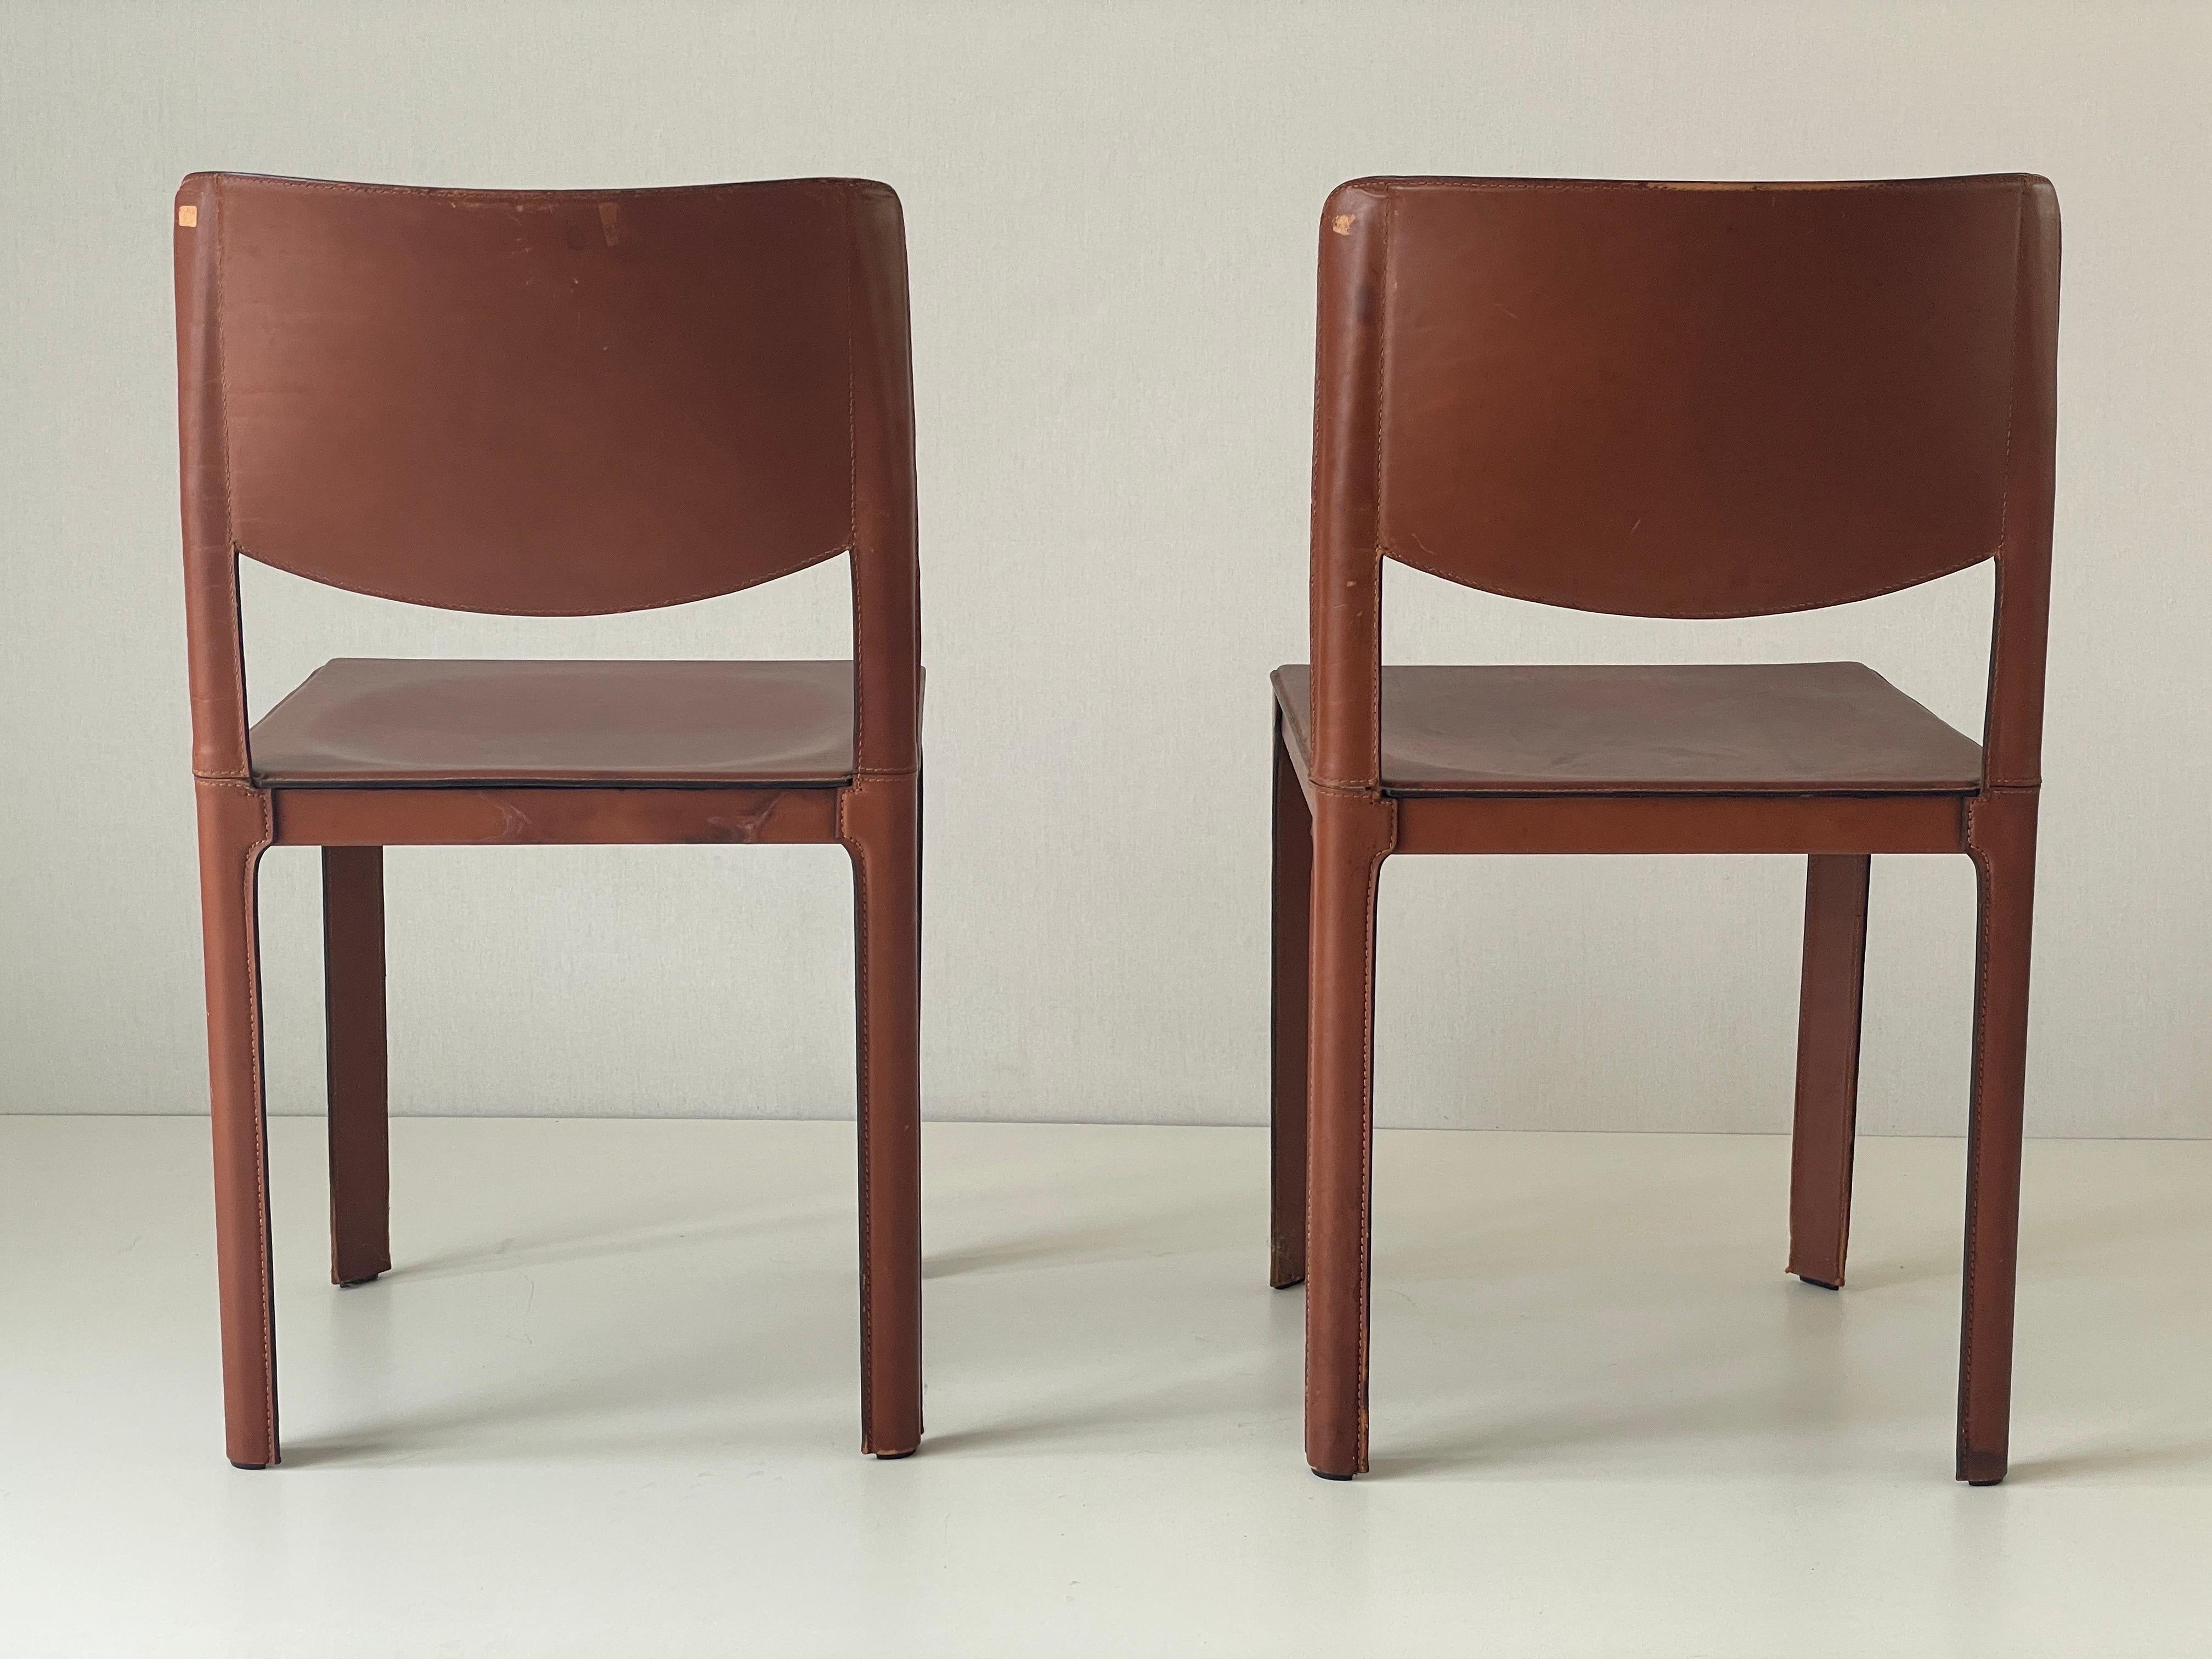 Pair of Italian Brown Leather Chairs by Matteo Grassi, 1970s, Italy For Sale 6